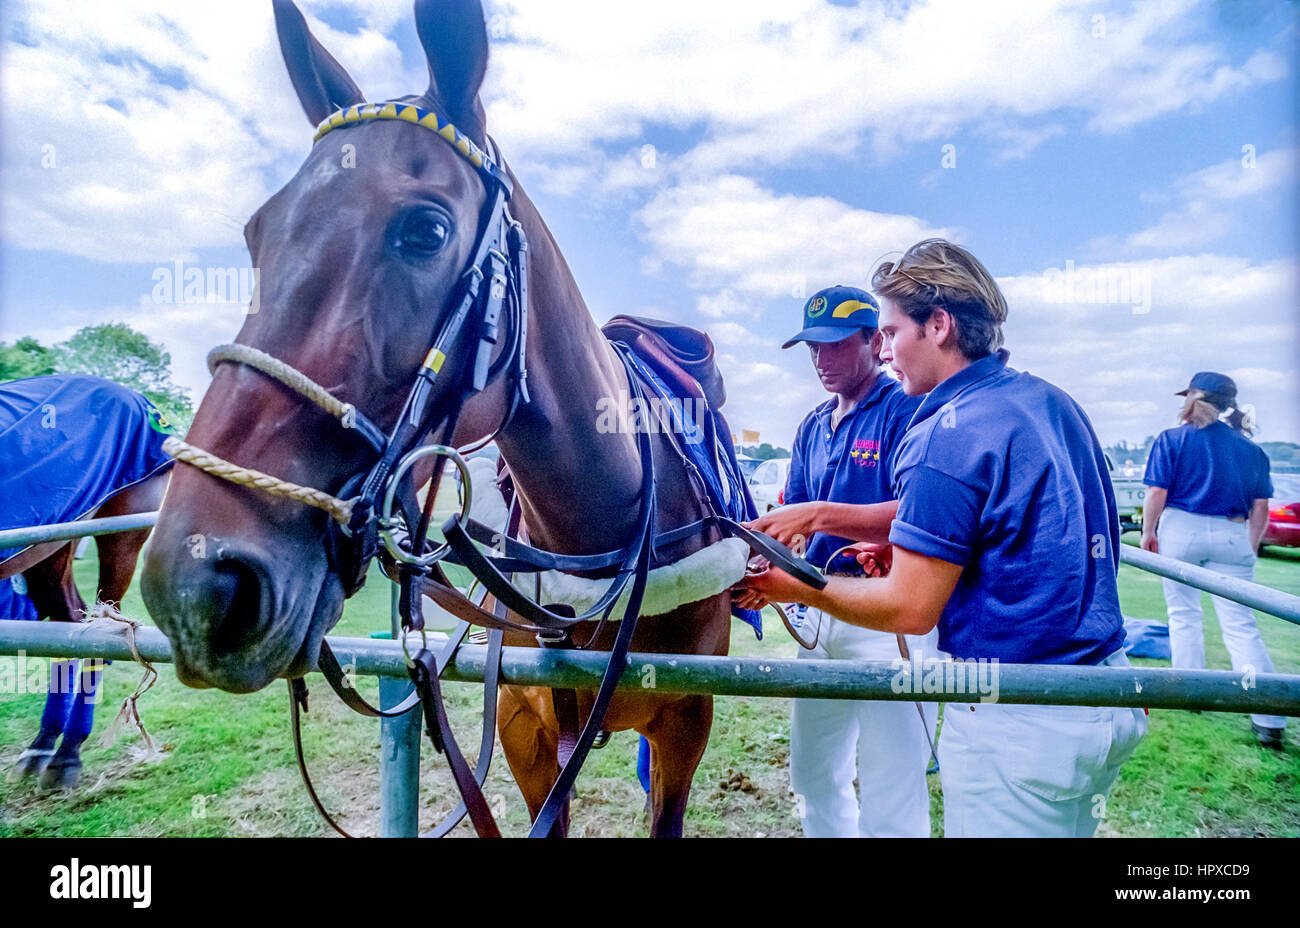 A Kerry Packer-sponsored polo tournament at Cowdray Park, Easebourne, near Midhurst in West Sussex:   Groomsmen caring for the horses. Stock Photo